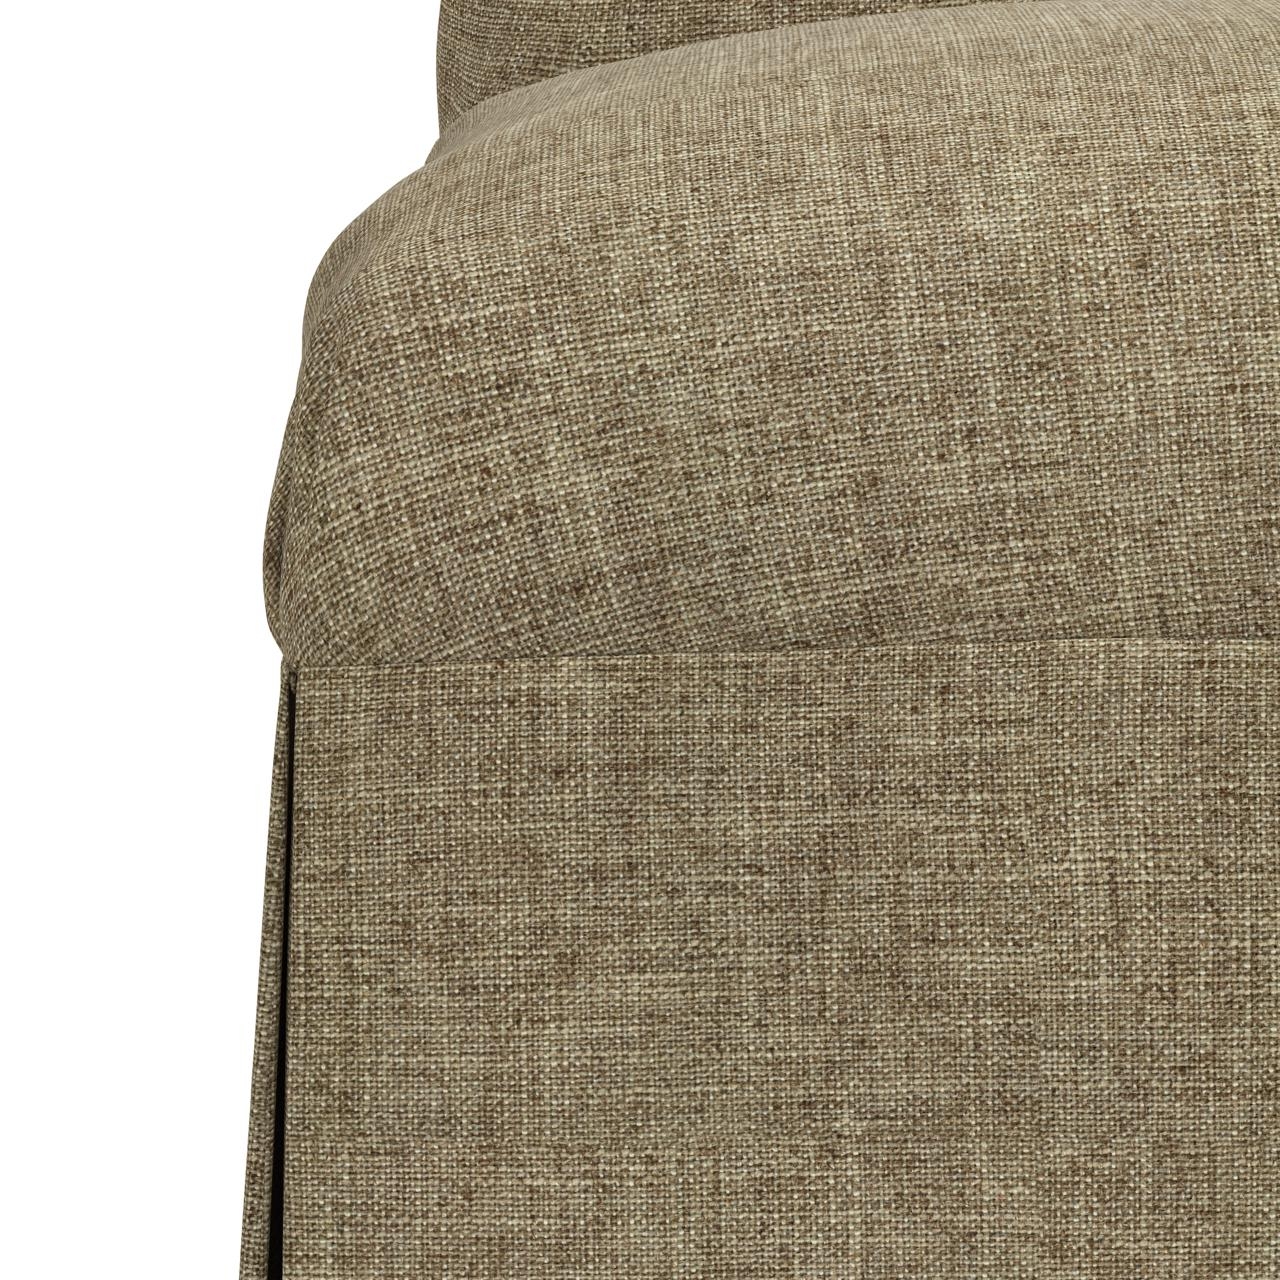 Alice Slipcover Dining Chair in Zuma Linen - Image 4